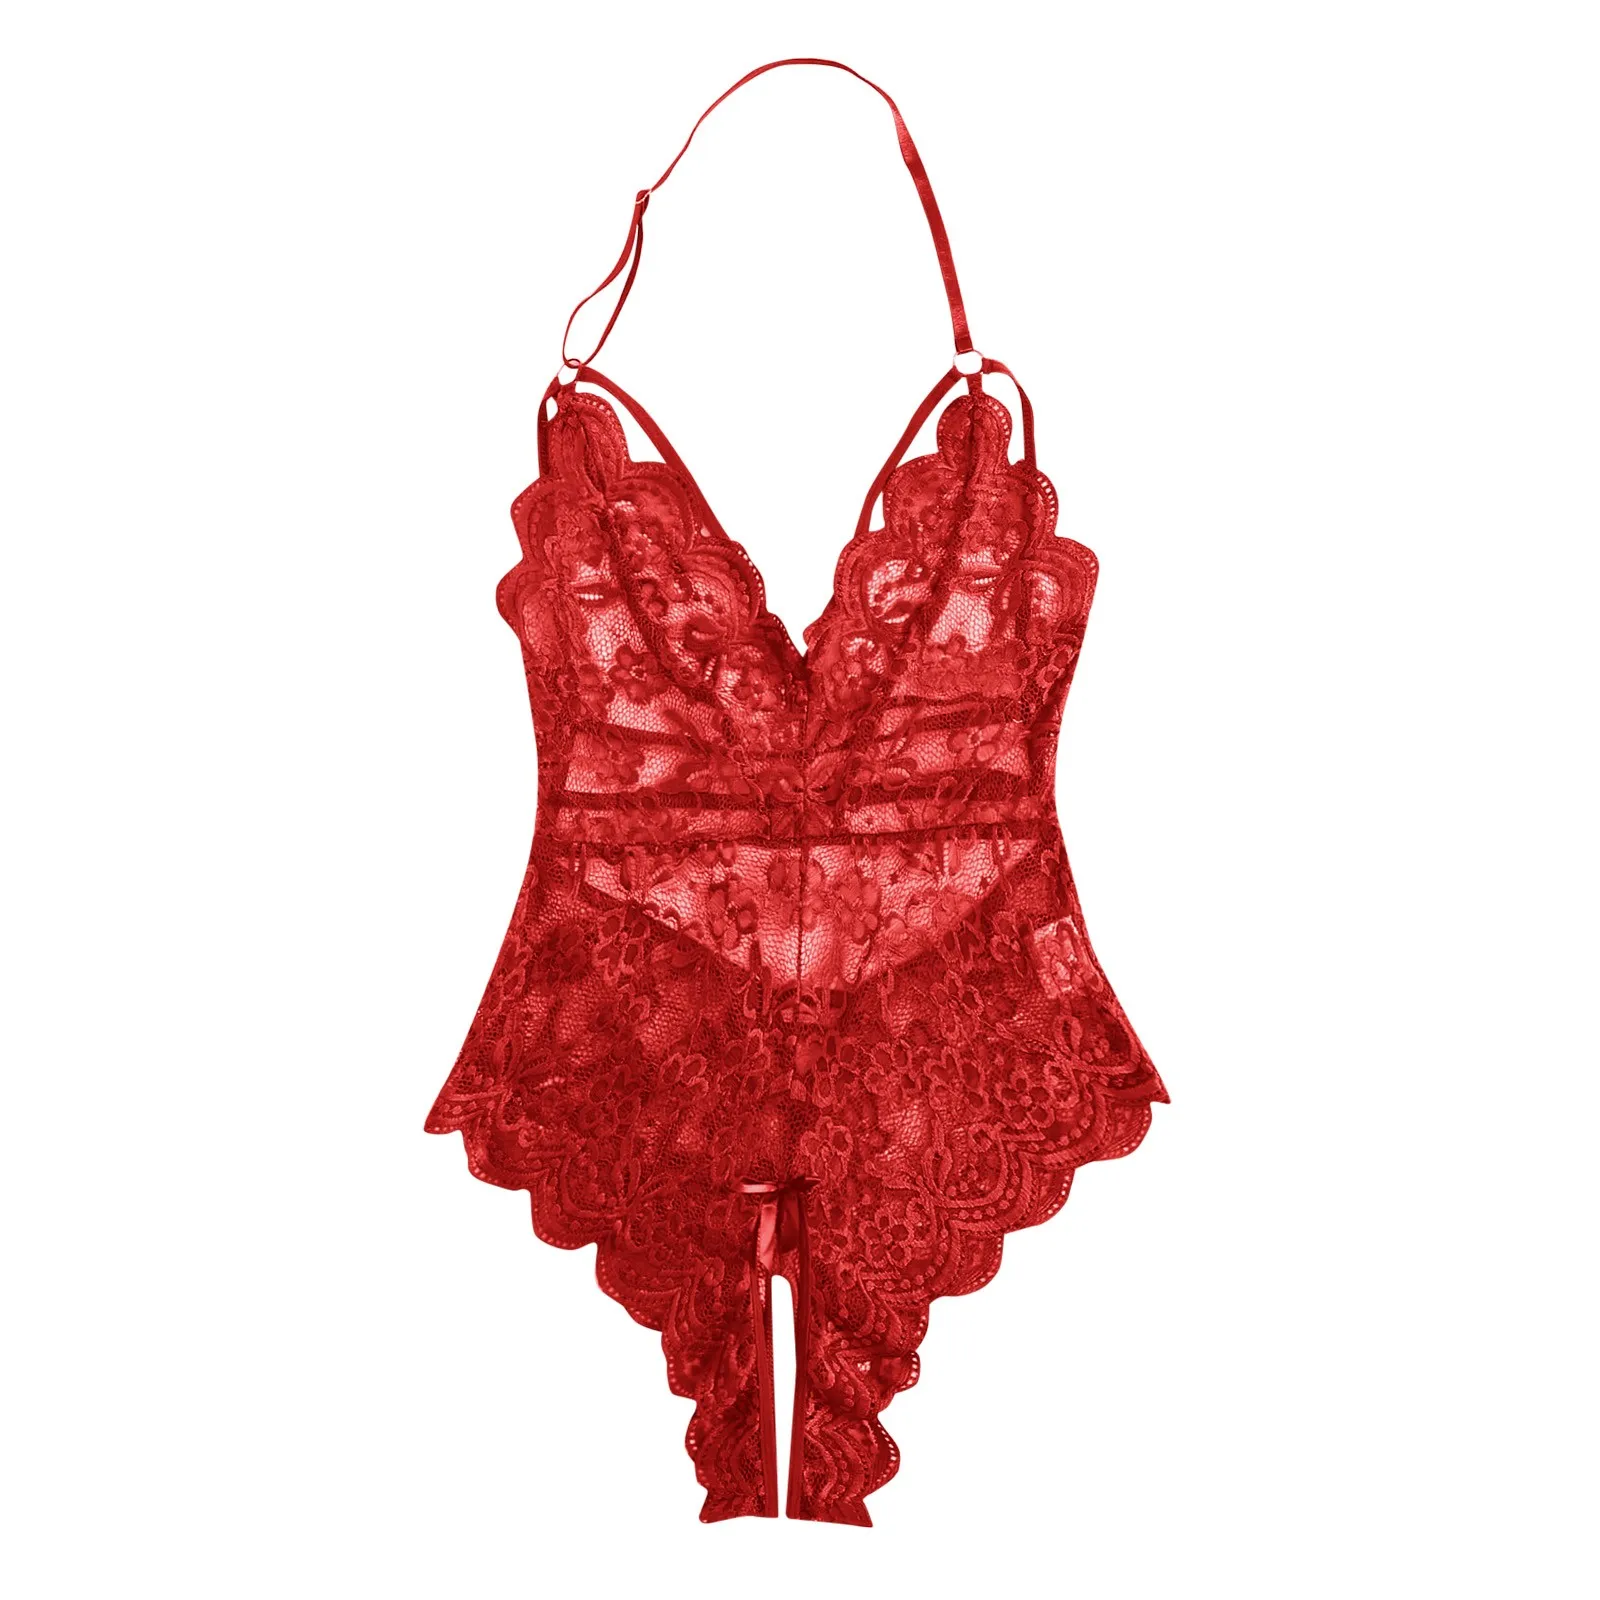 bra and knicker sets cheap Women Fashion One Pieces Lingerie Sensual Roleplay Lingerie Sexy Women Costumes Red Plaid Lace Erotic Lingerie plus size bra and panty sets